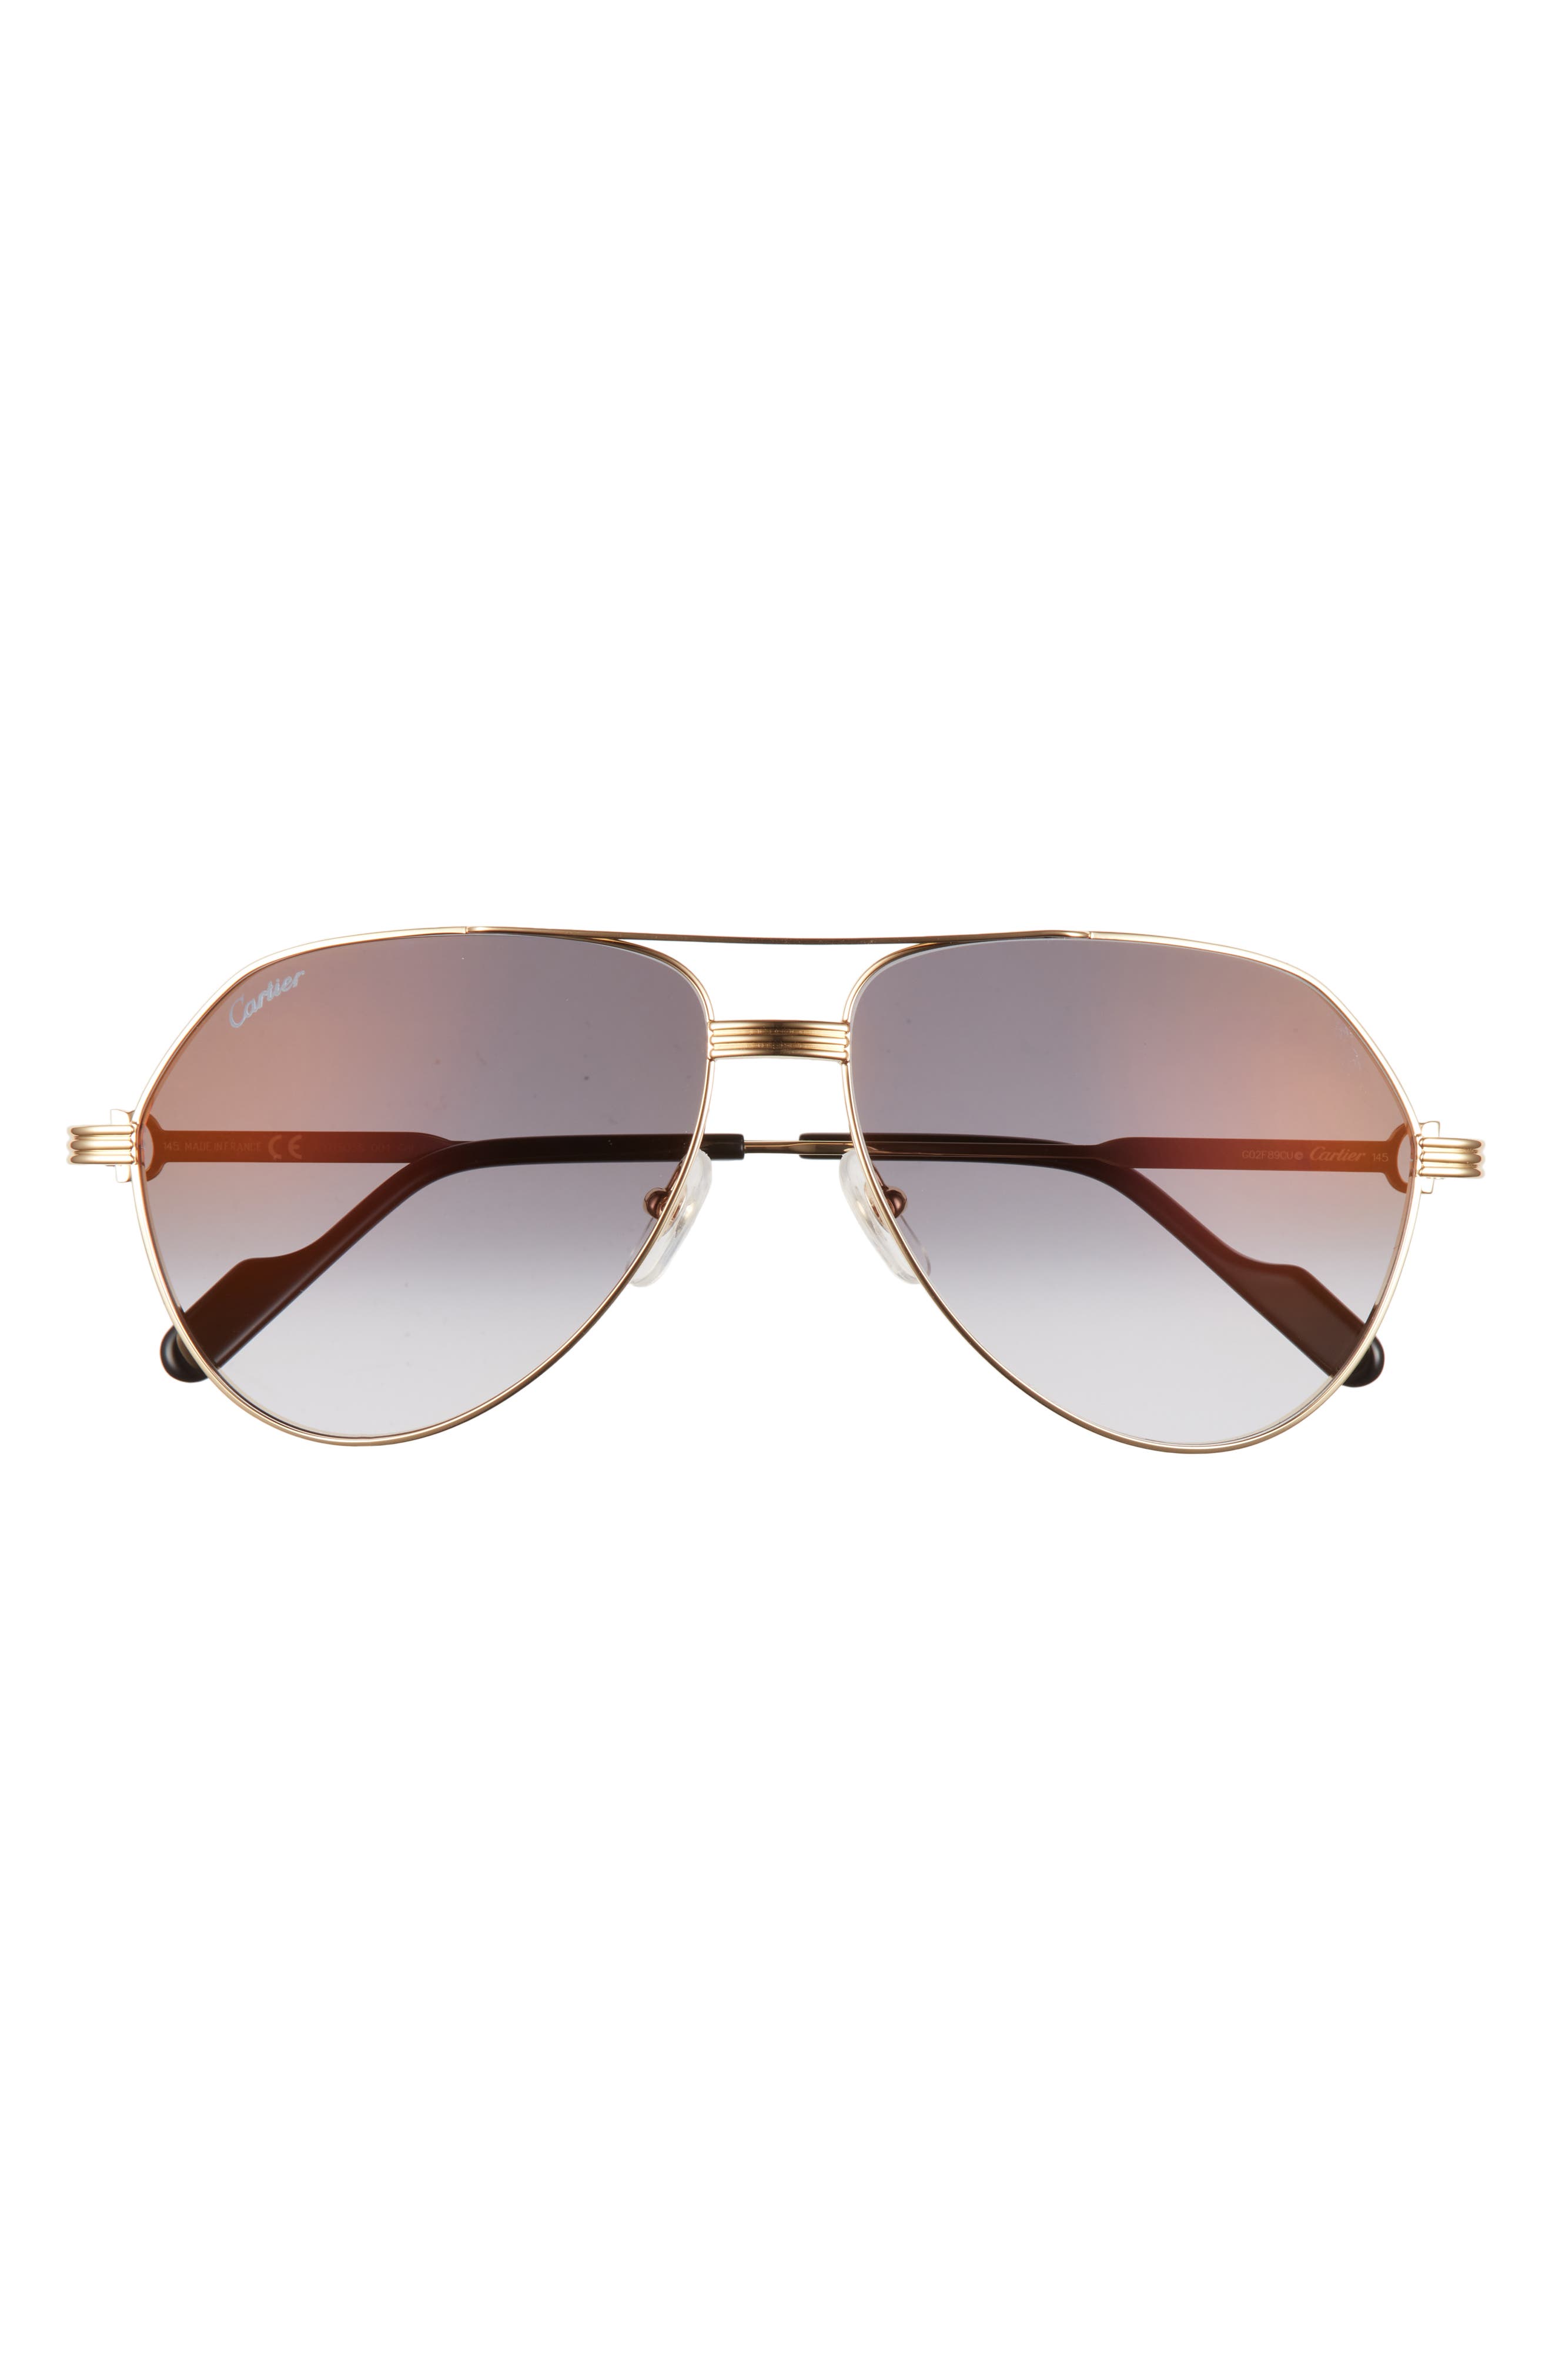 Cartier 61mm Aviator Sunglasses in Gold/Gold at Nordstrom